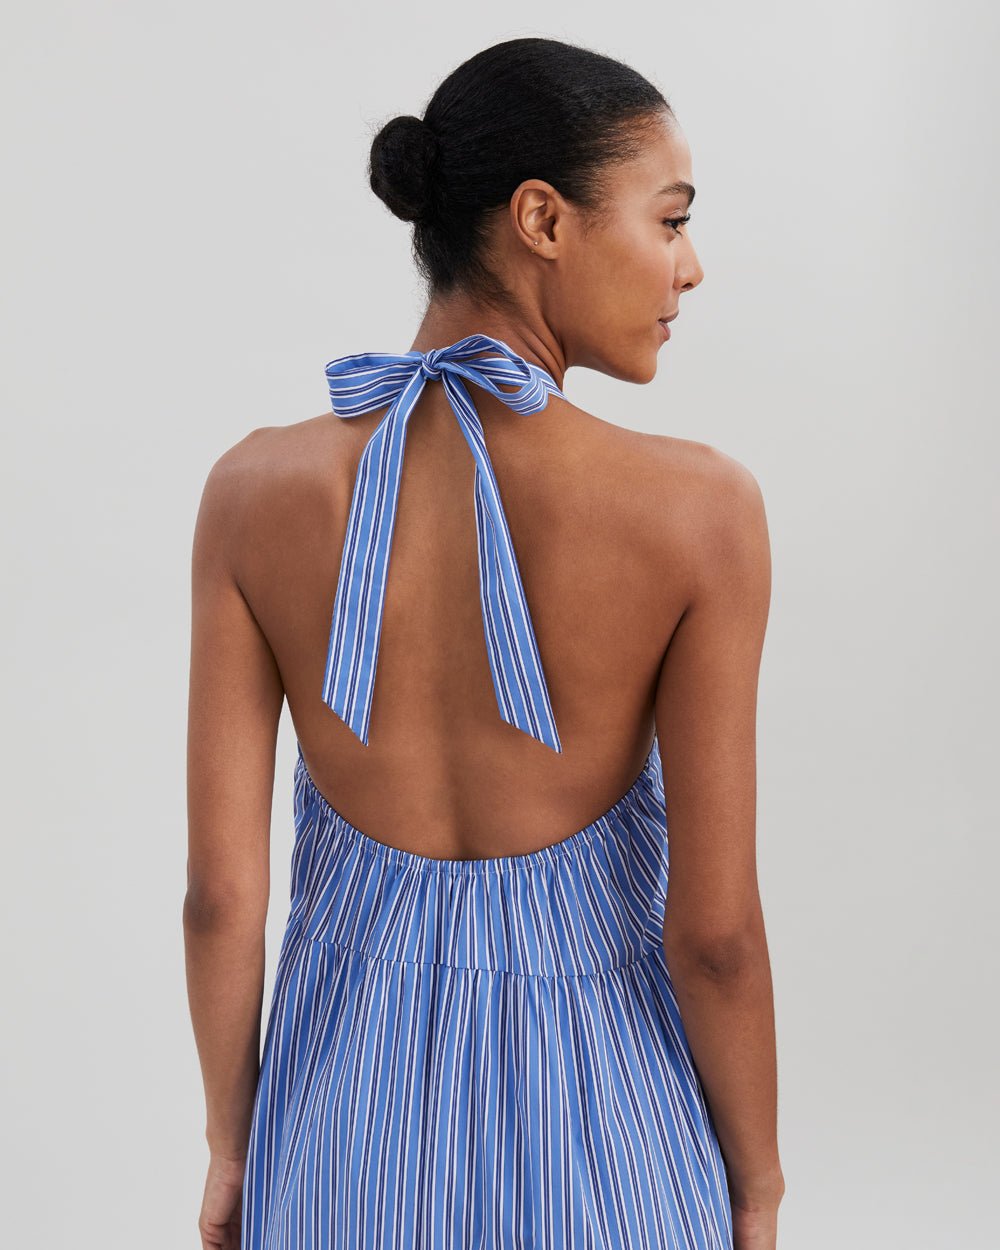 The Kai Dress - Solid & Striped